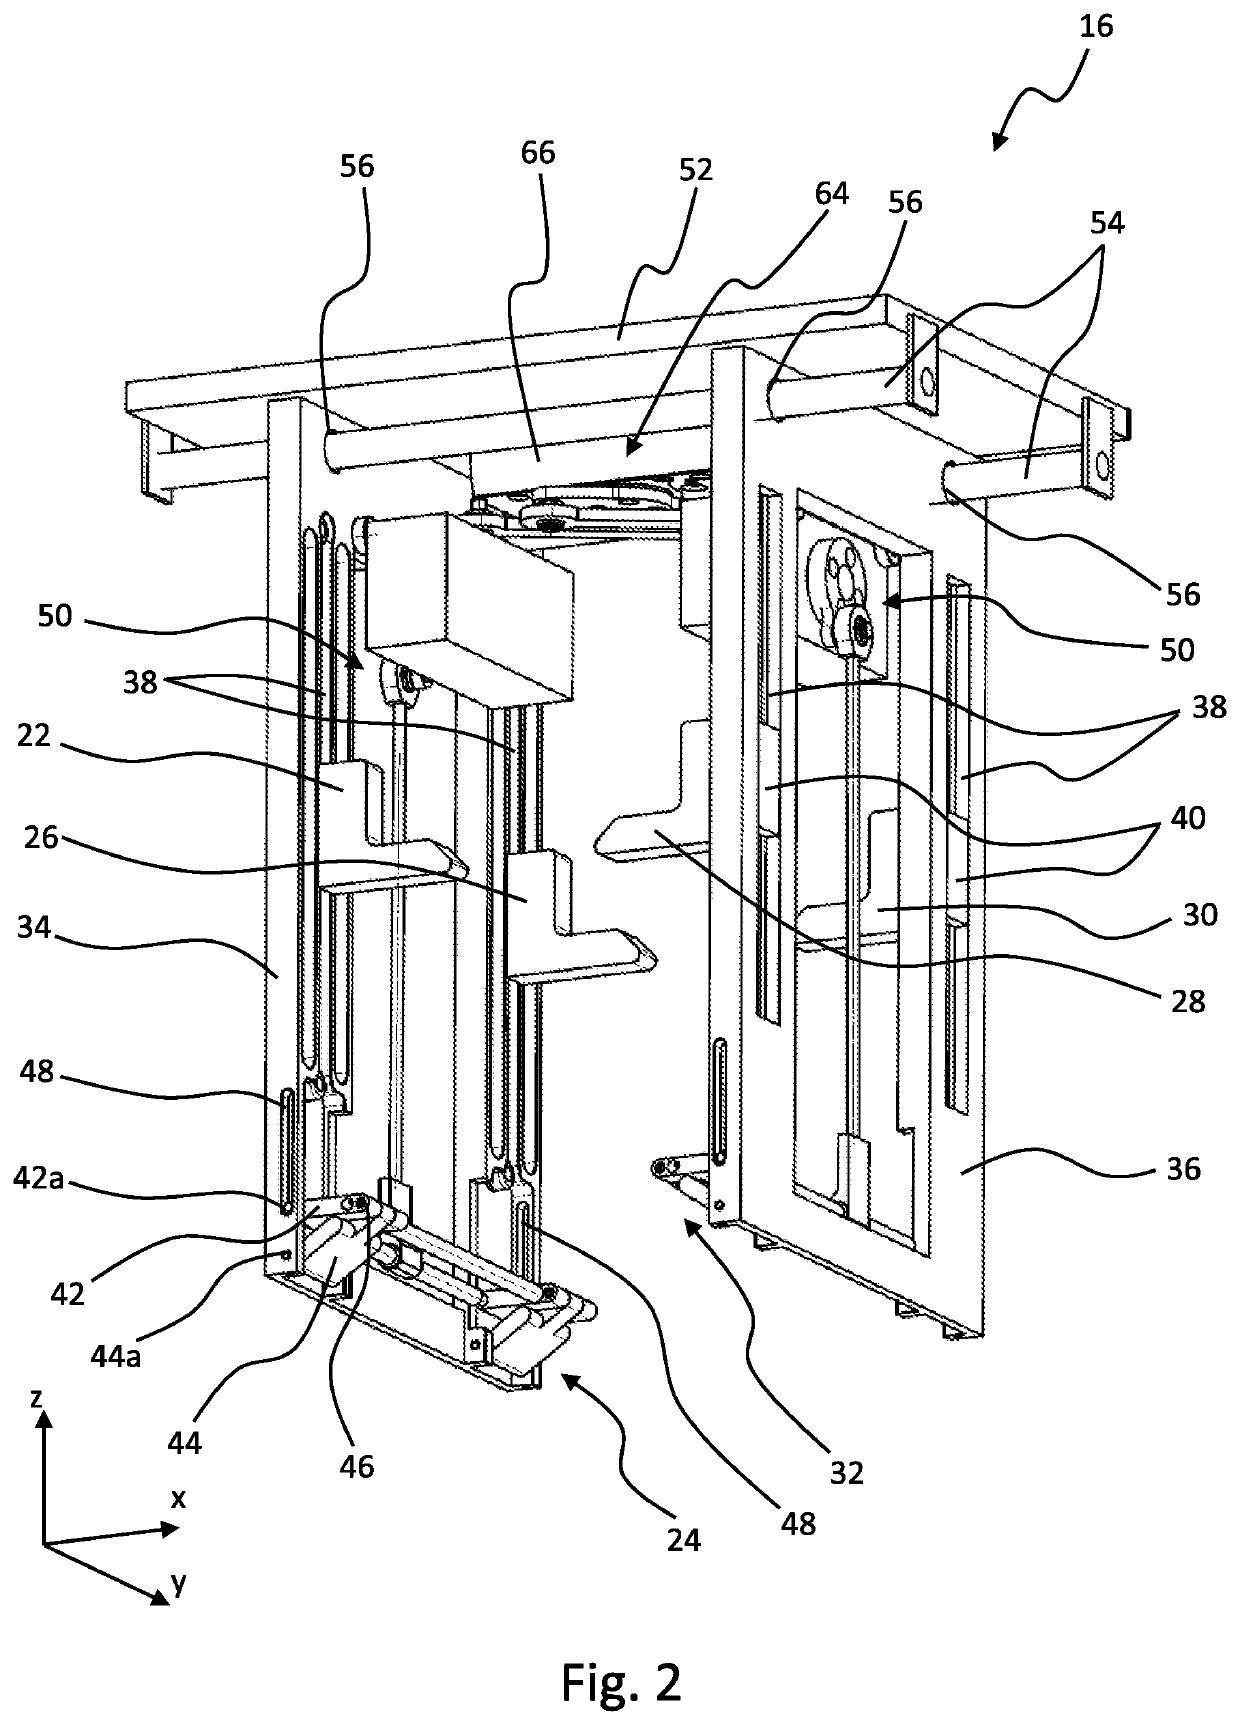 Handling device for product stacks